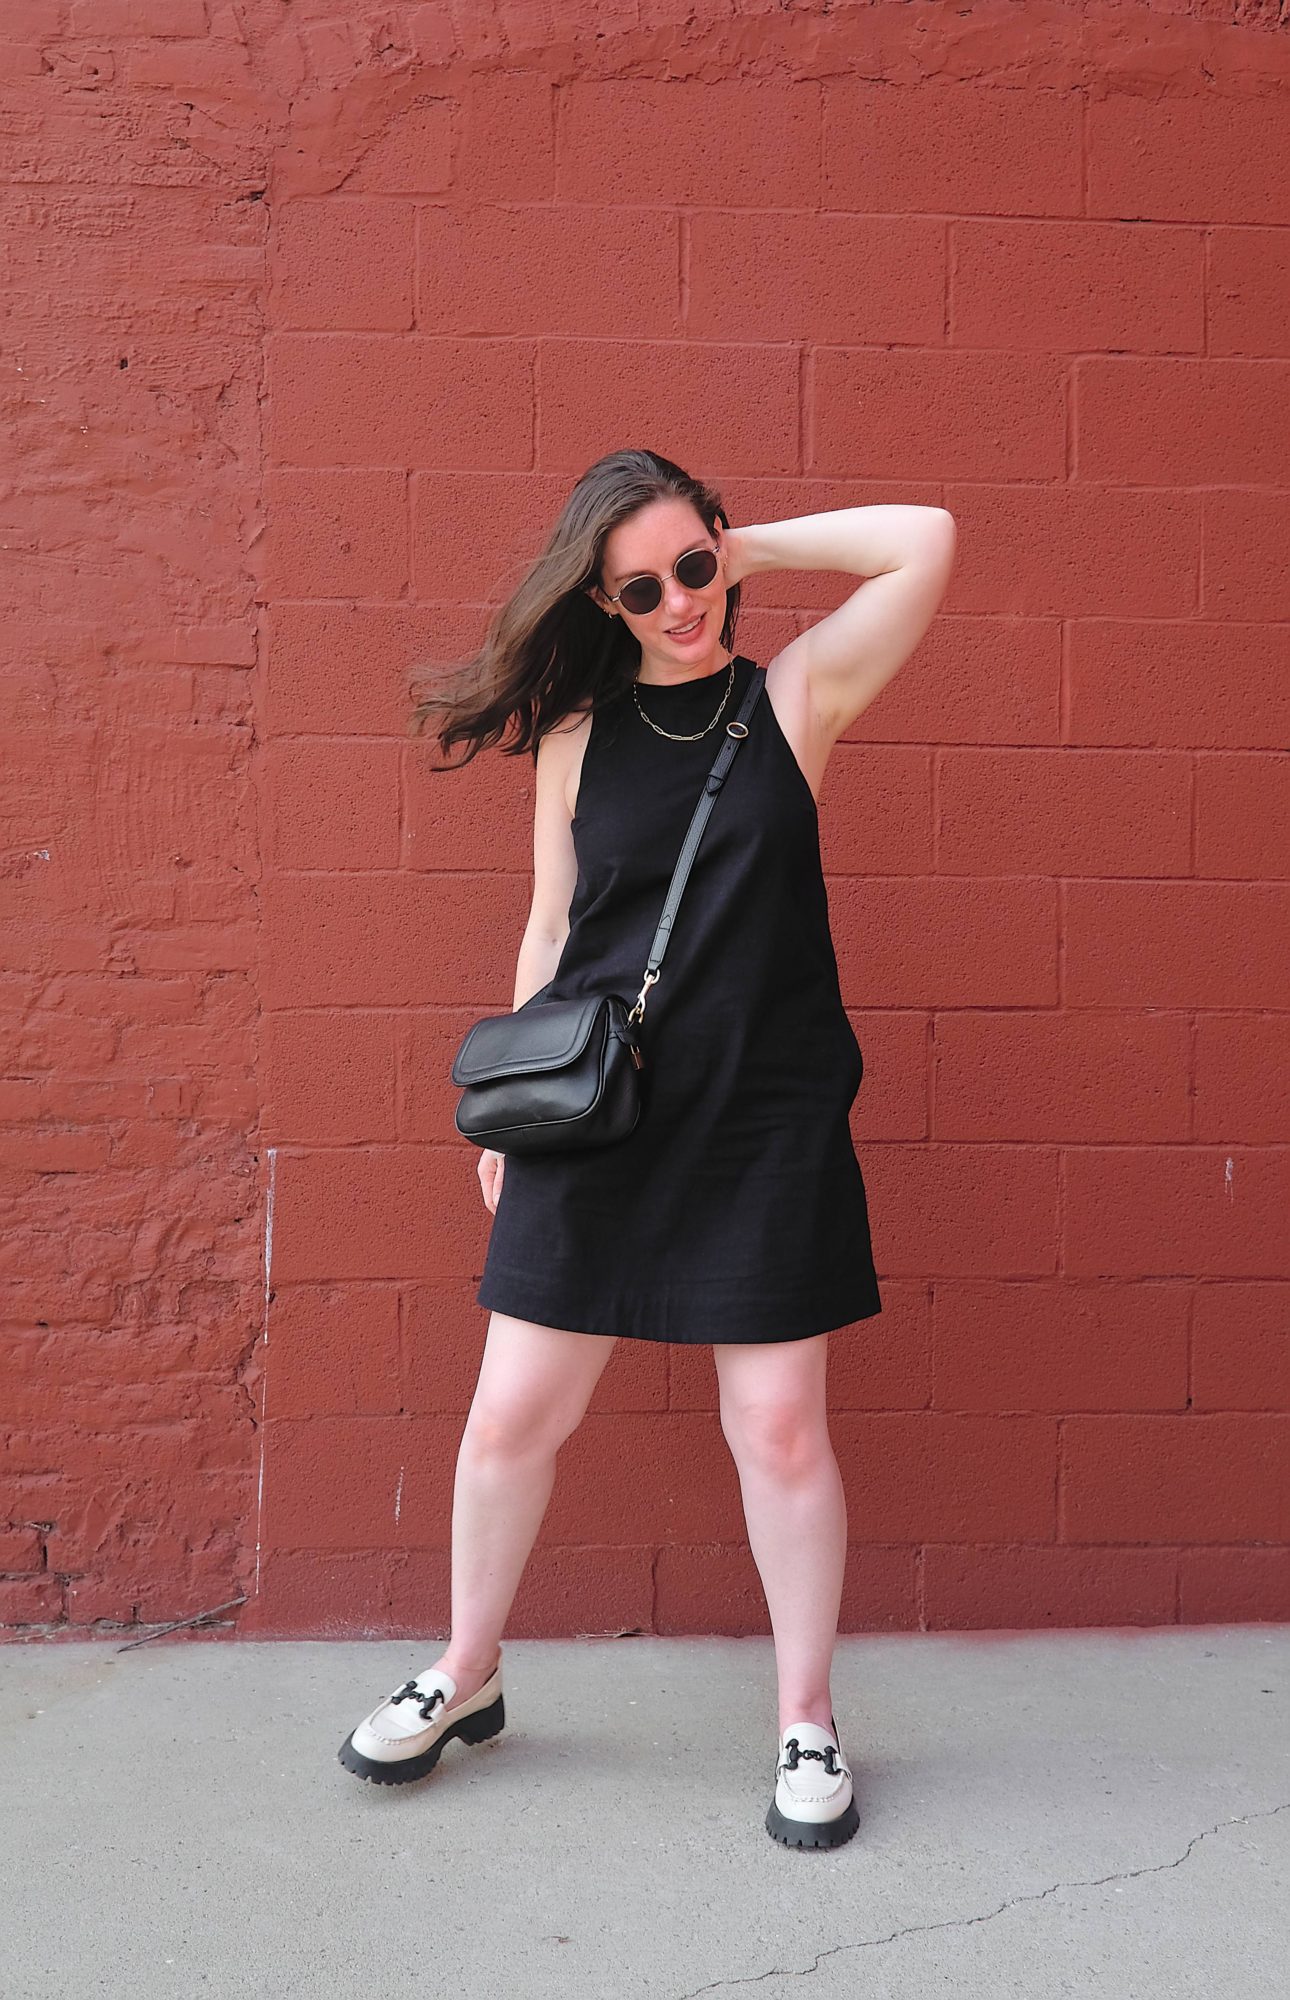 Alyssa wears a black linen dress and white loafers